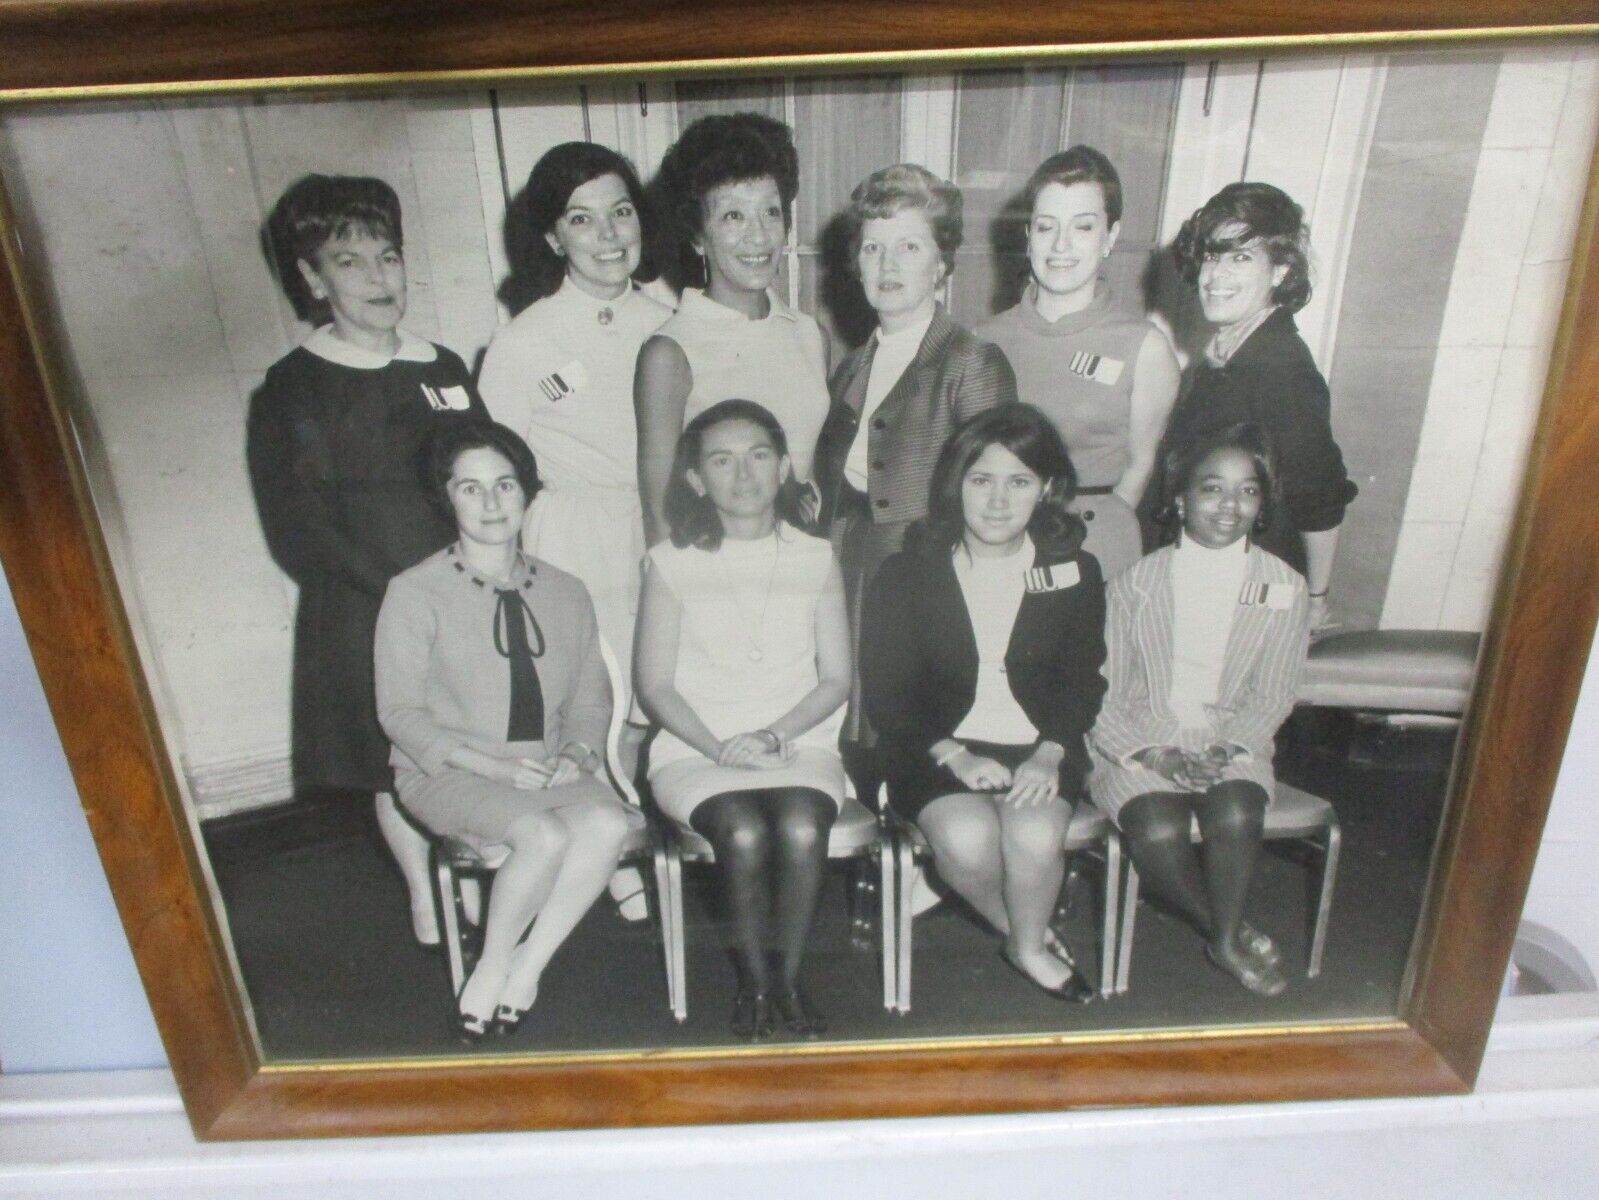 Large Framed Black and White Photo of 10 Women with 